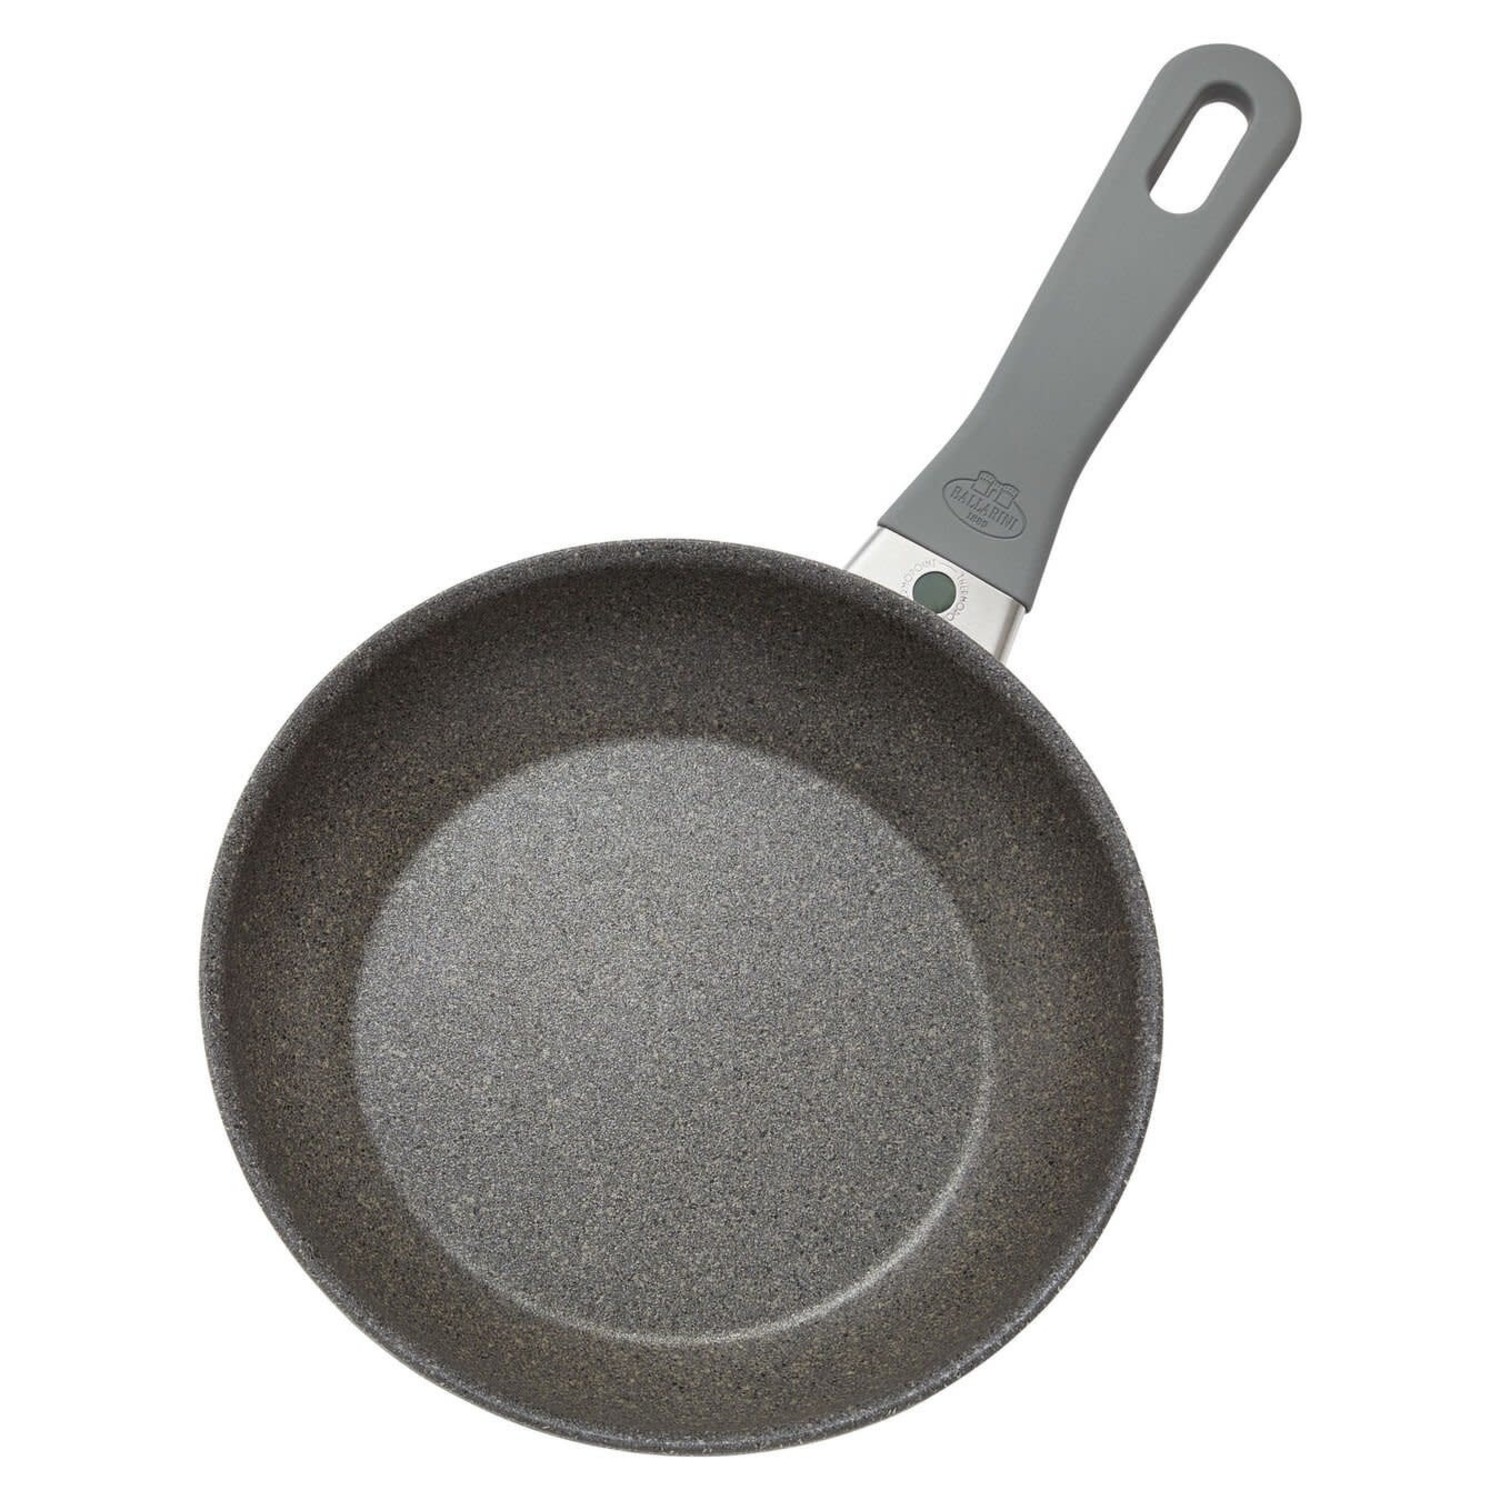 ZWILLING Energy Plus 8-inch Stainless Steel Ceramic Nonstick Fry